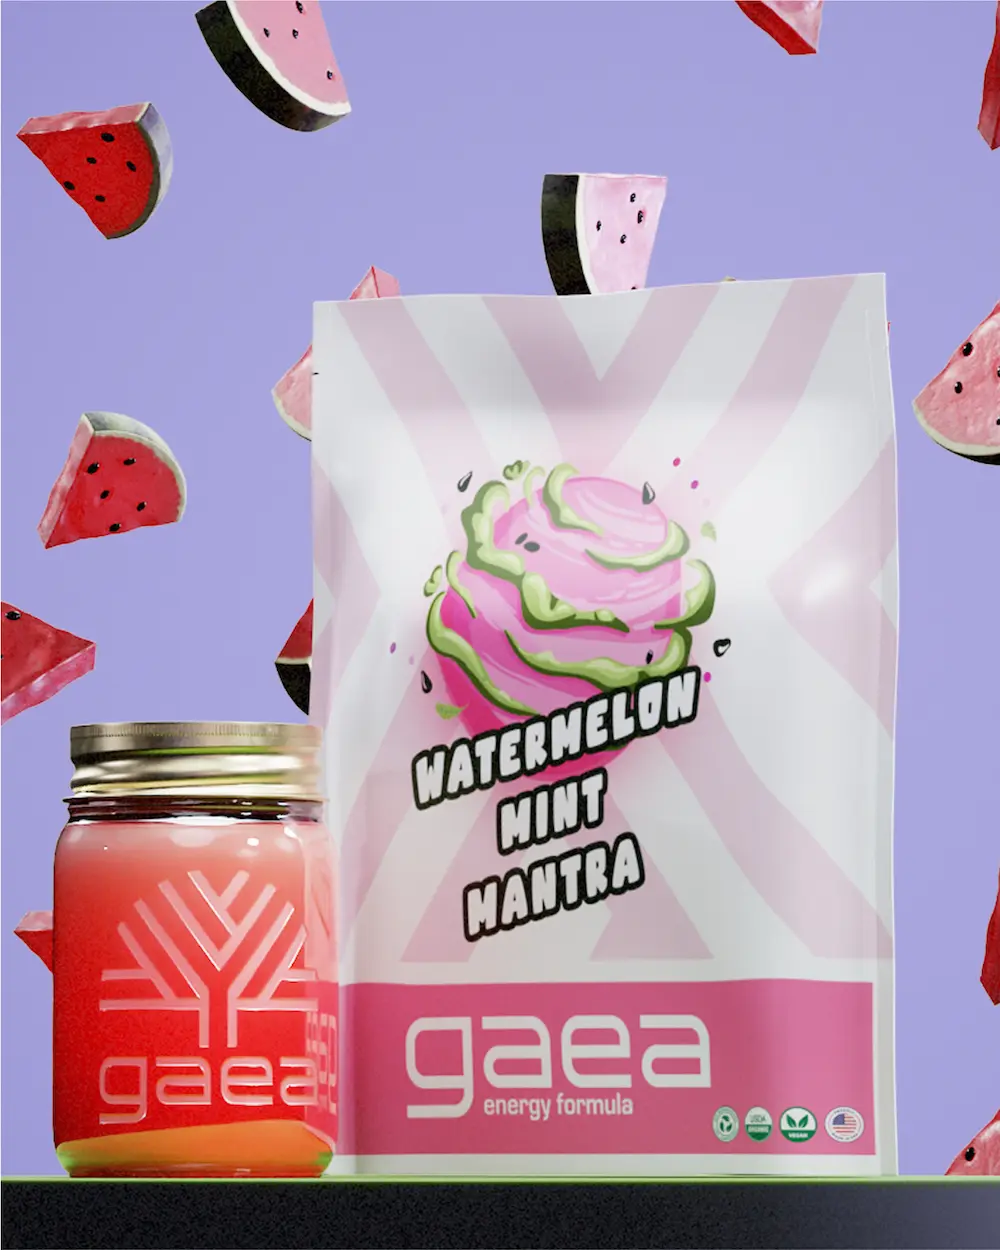 gaea's watermelon mint mantra energy elixir pictured in the mason jar and in the bag. purple background with watermelons.